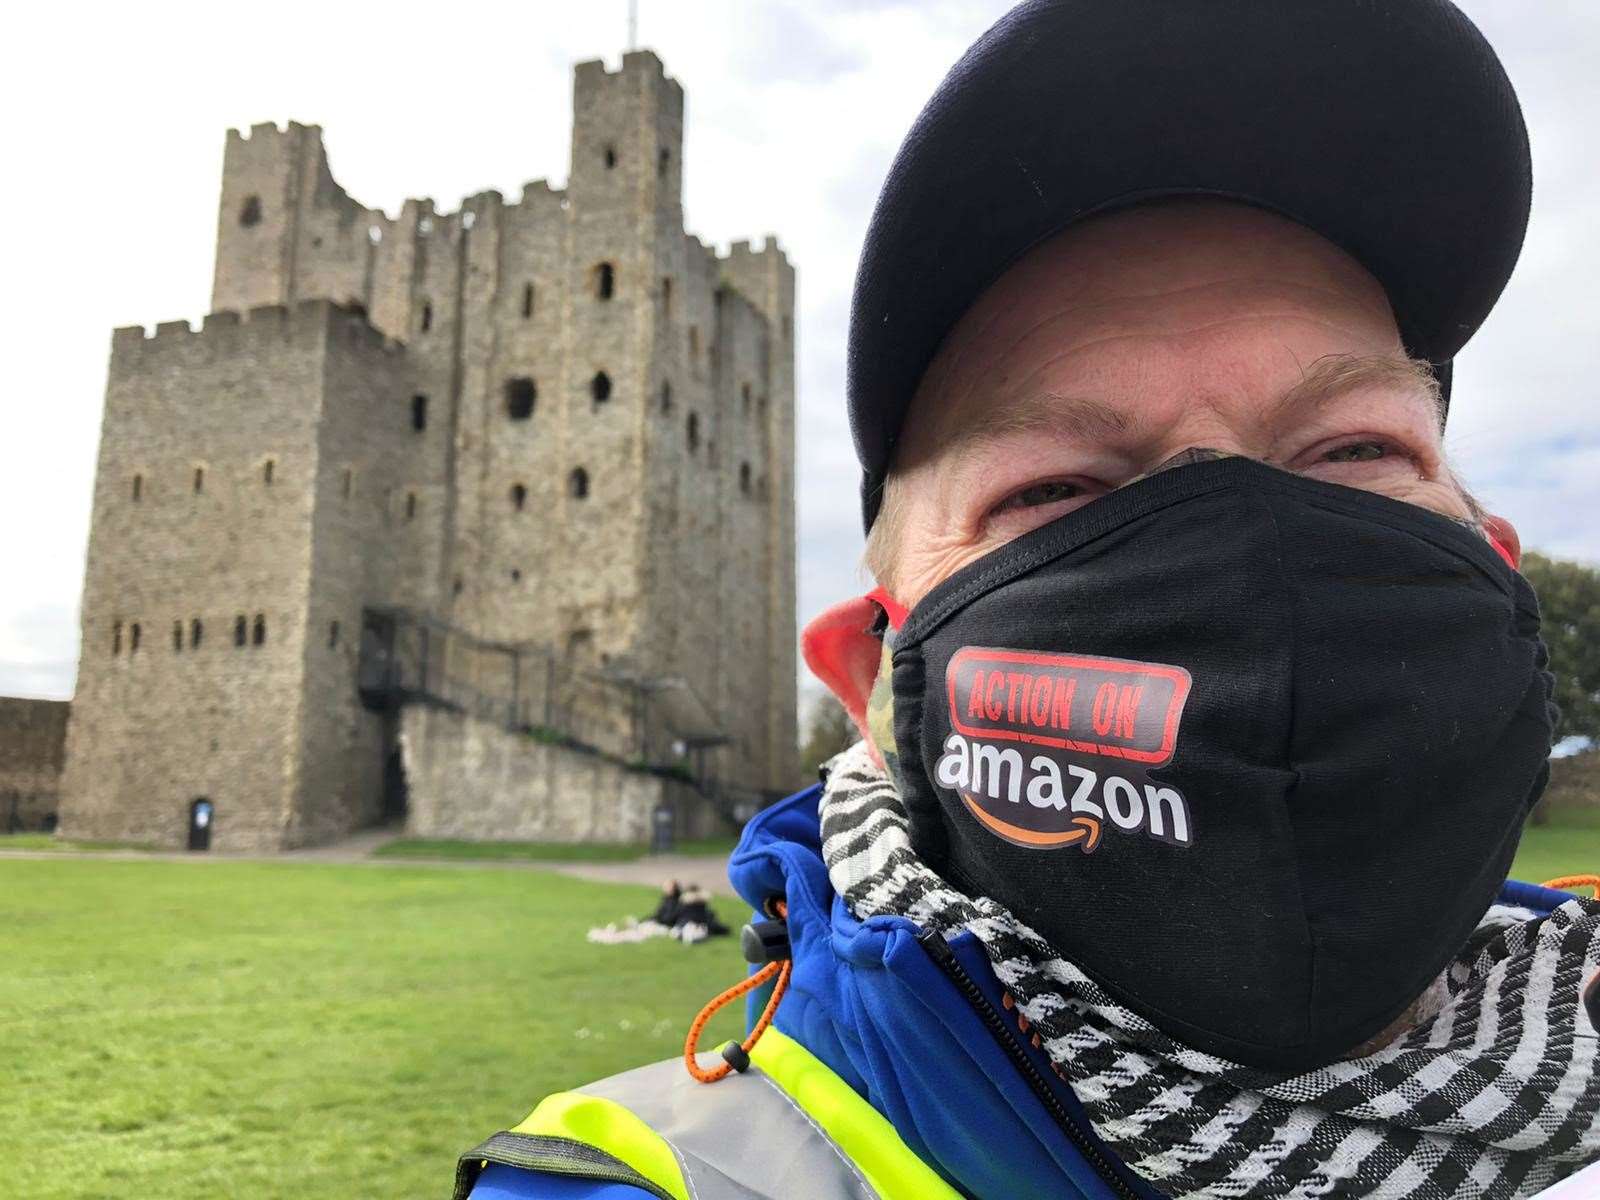 Action On Amazon campaigners at Rochester Cathedral